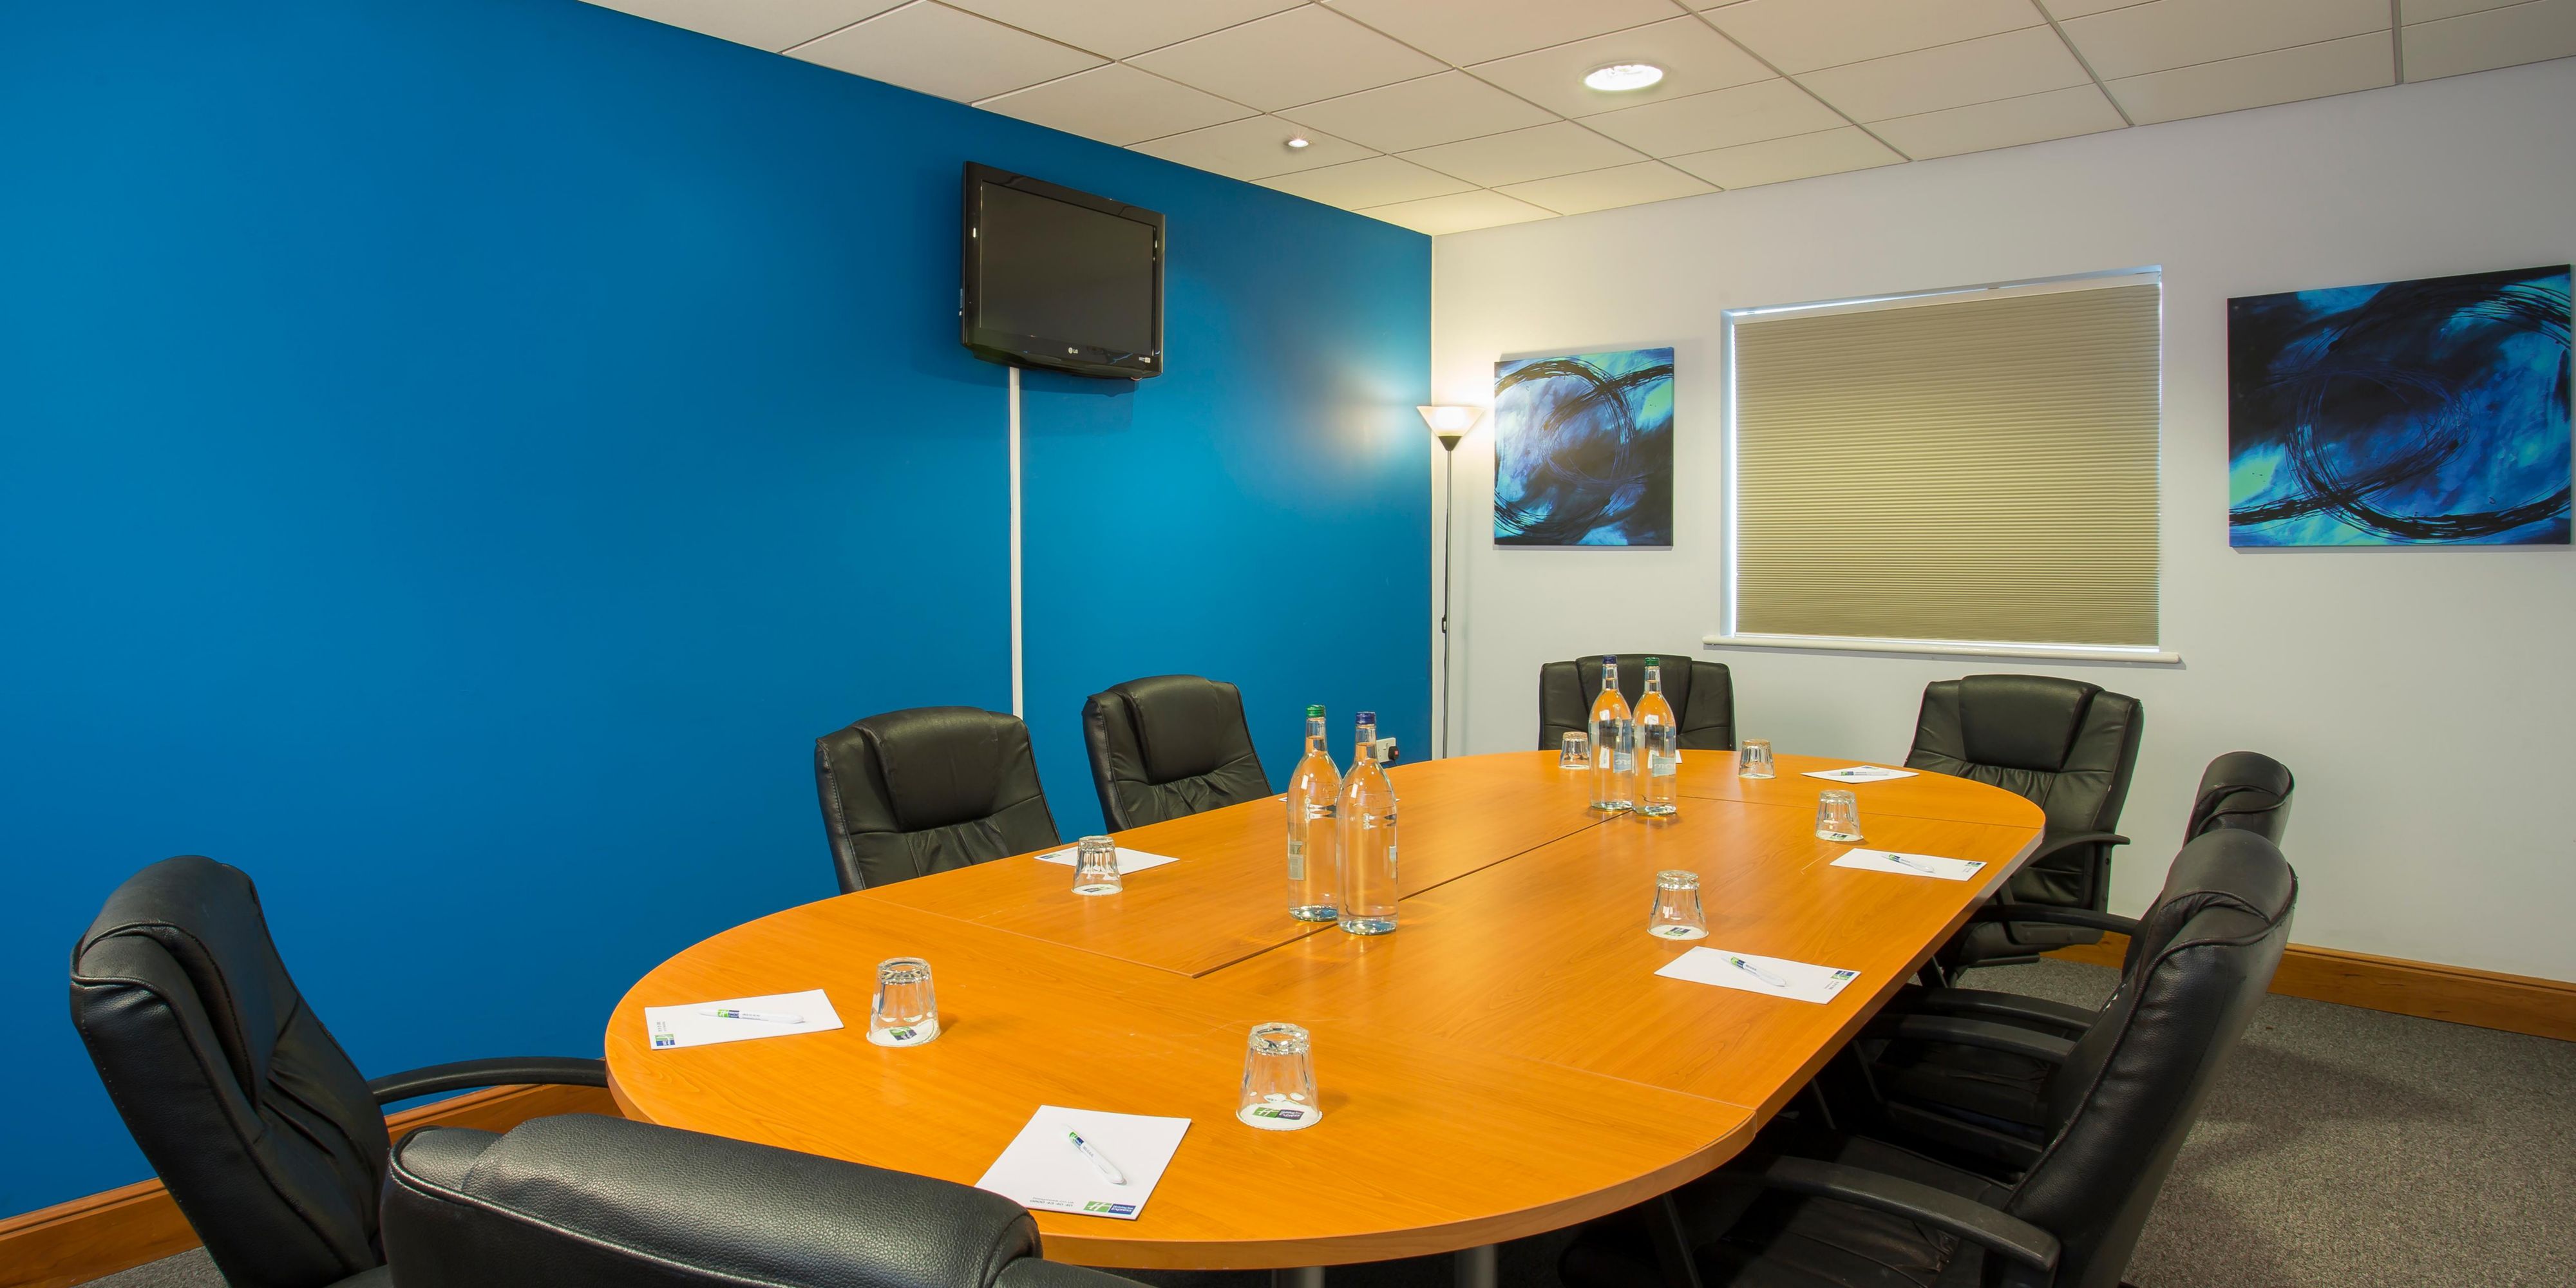 Are you looking for a space to host your next meeting or presentation? A space that is not only stimulating but also professionally equipped. Look no further than Holiday Inn Express Braintree.

We offer 2 separate rooms with a maximum capacity for 12 delegates in each.